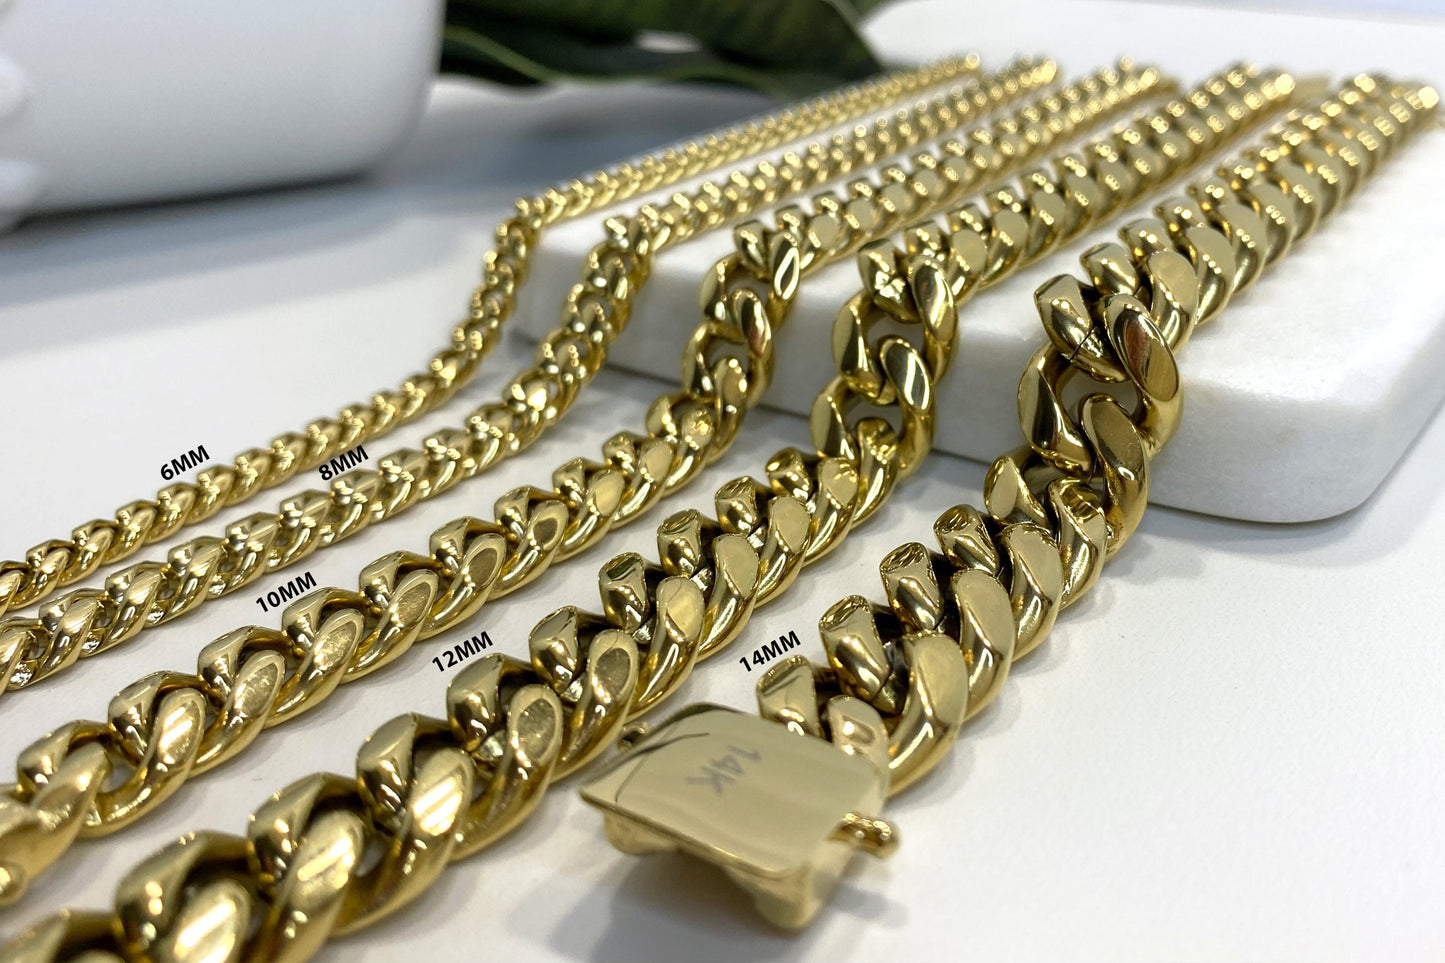 14mm Miami Cuban Chain in 14k Gold Filled, Double Safety Lock Box, Chunky Curb Link Chain, Unisex Necklace, Wholesale Jewelry Supplies